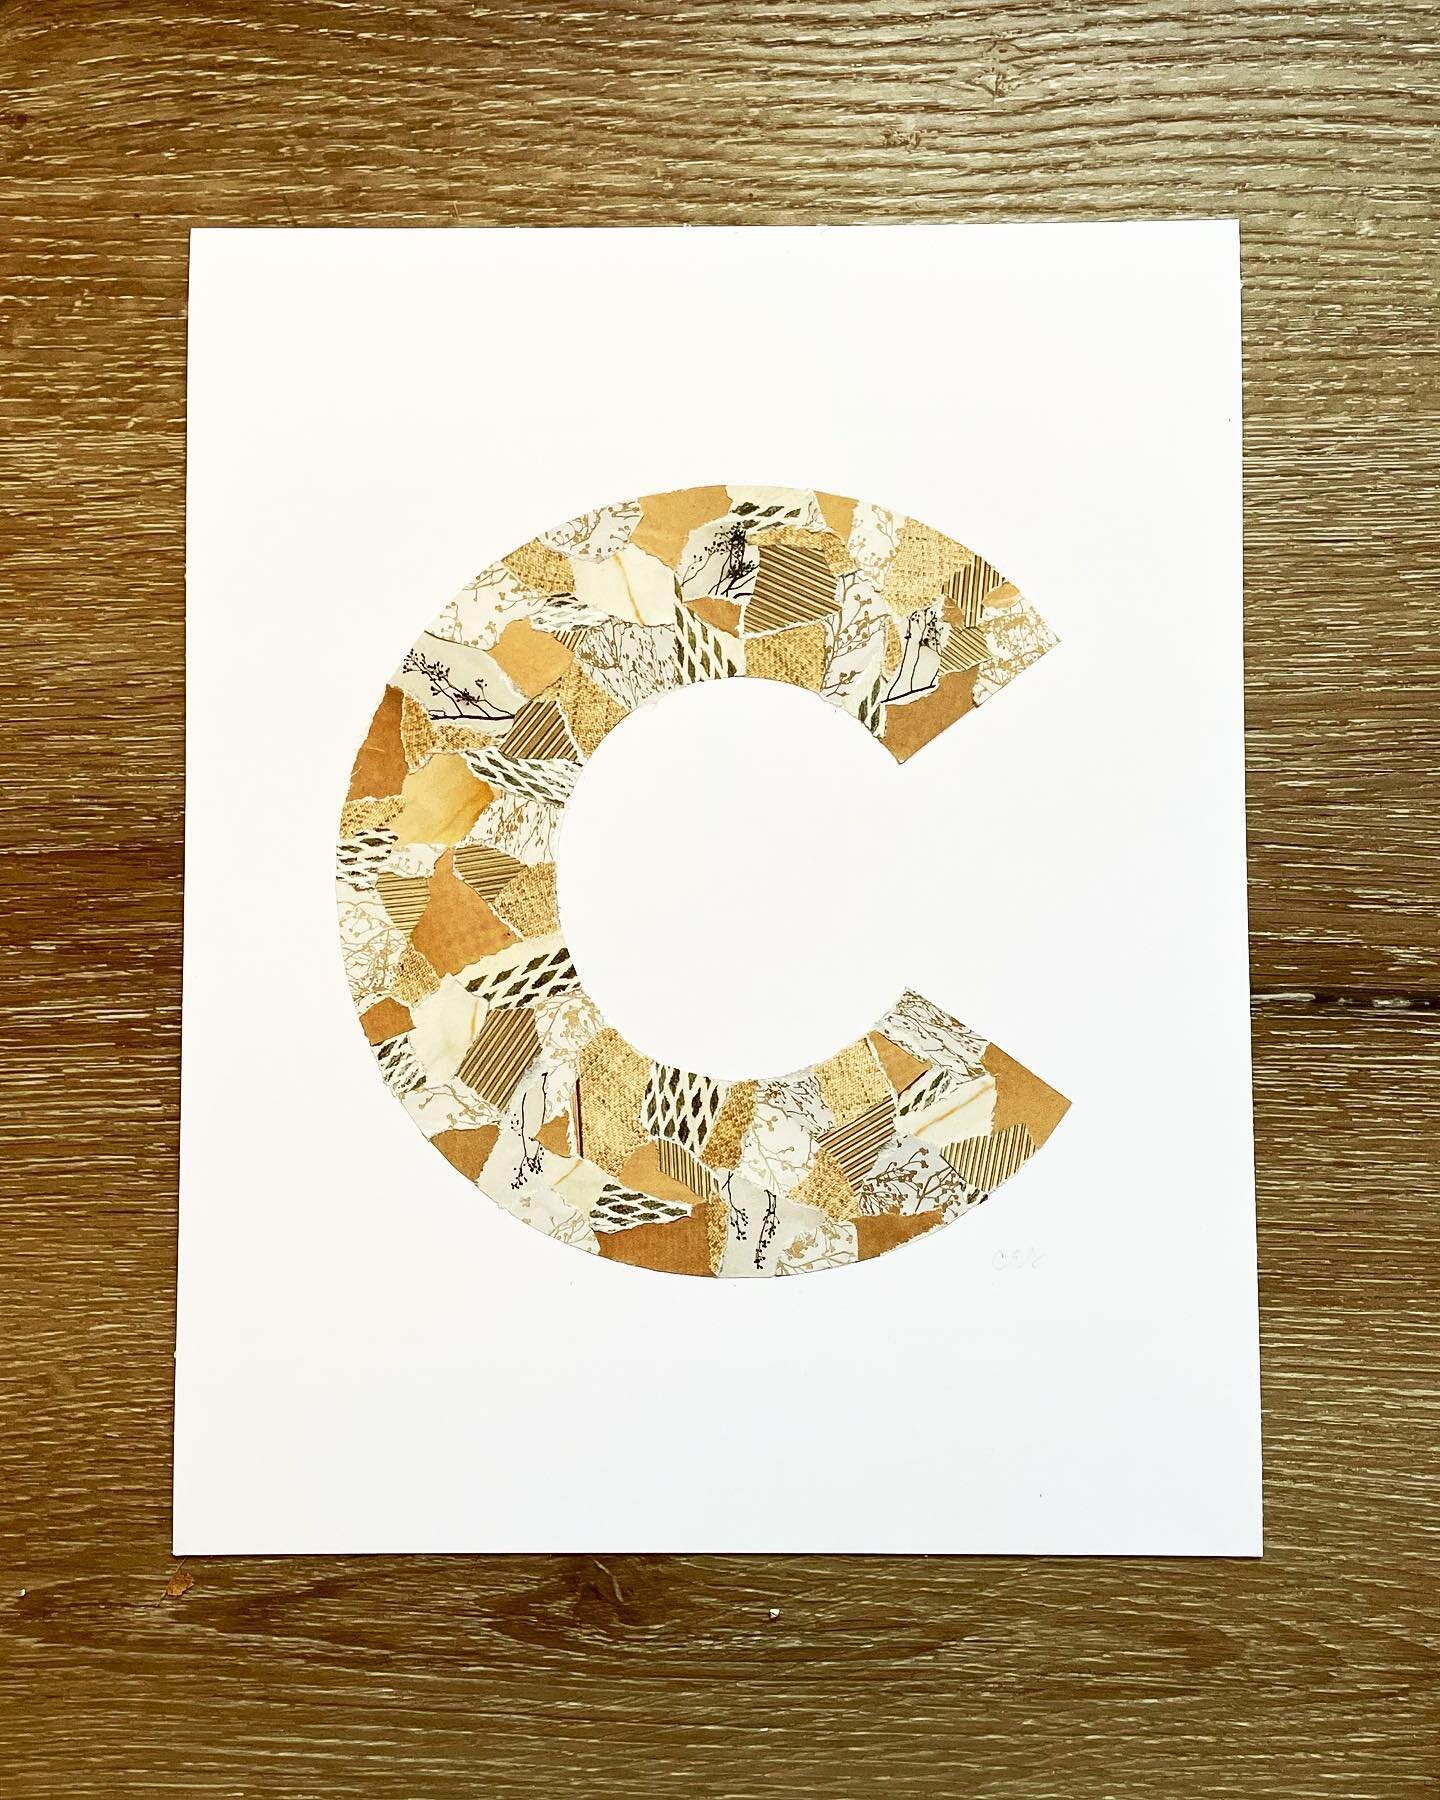 Neutral, natural elements filled this custom &ldquo;C&rdquo; for the newlyweds a few weeks ago / paying homage to the bride&rsquo;s bridesmaid dresses that were a gorgeous taupe 🤍 

Custom collages are fabulous gifts for weddings, bridal showers, ba